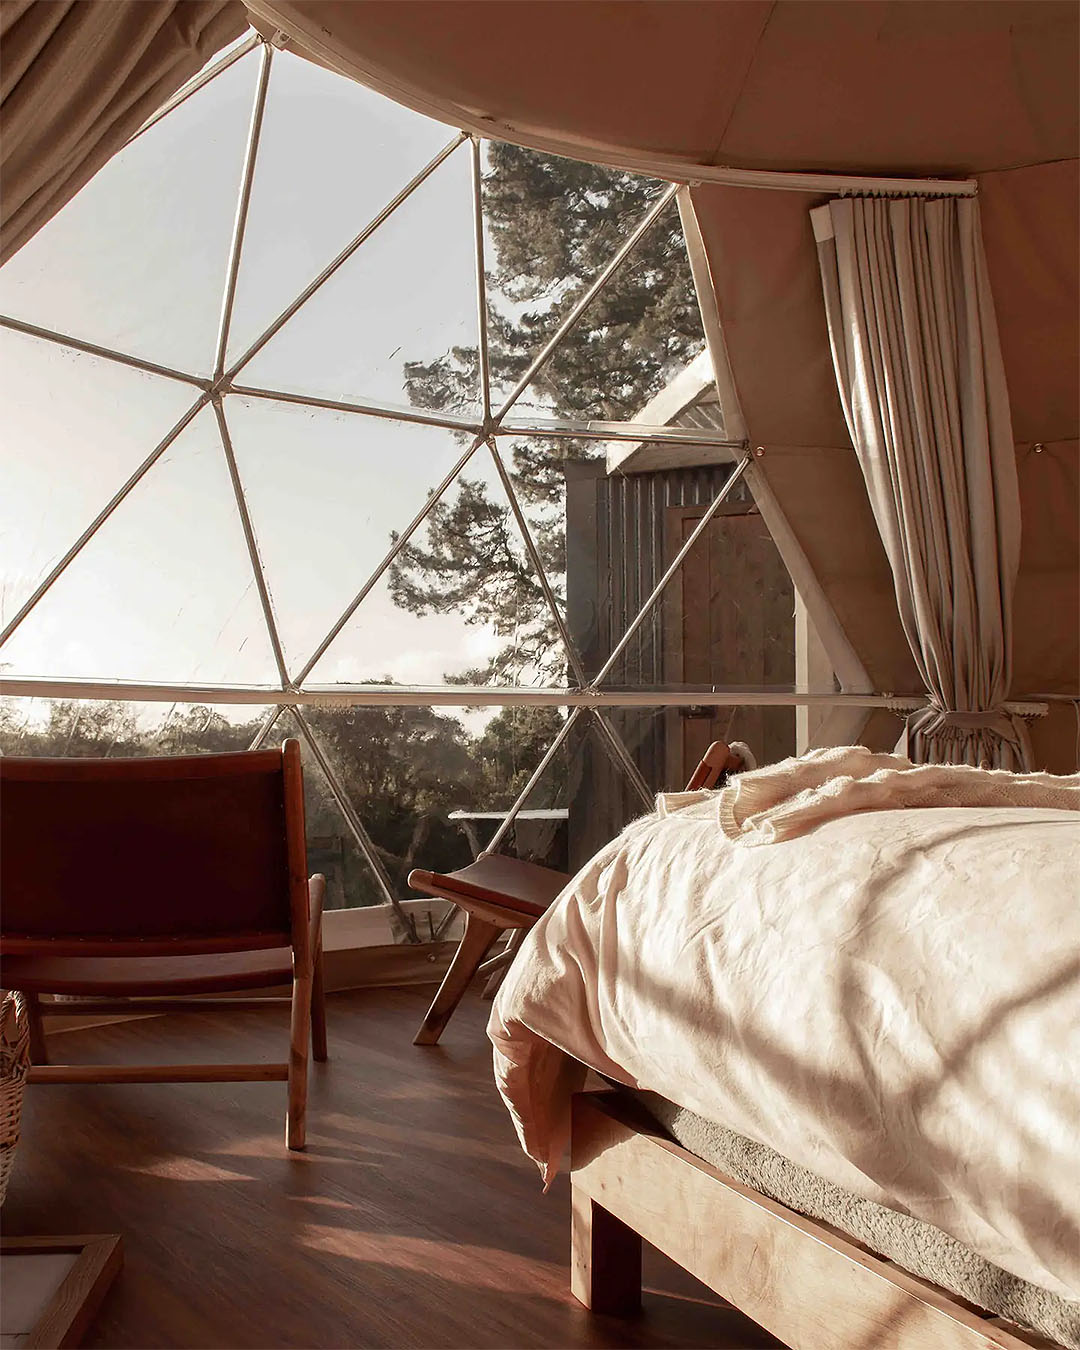 A cosy geodesic dome is seen from the inside, bathed with light.